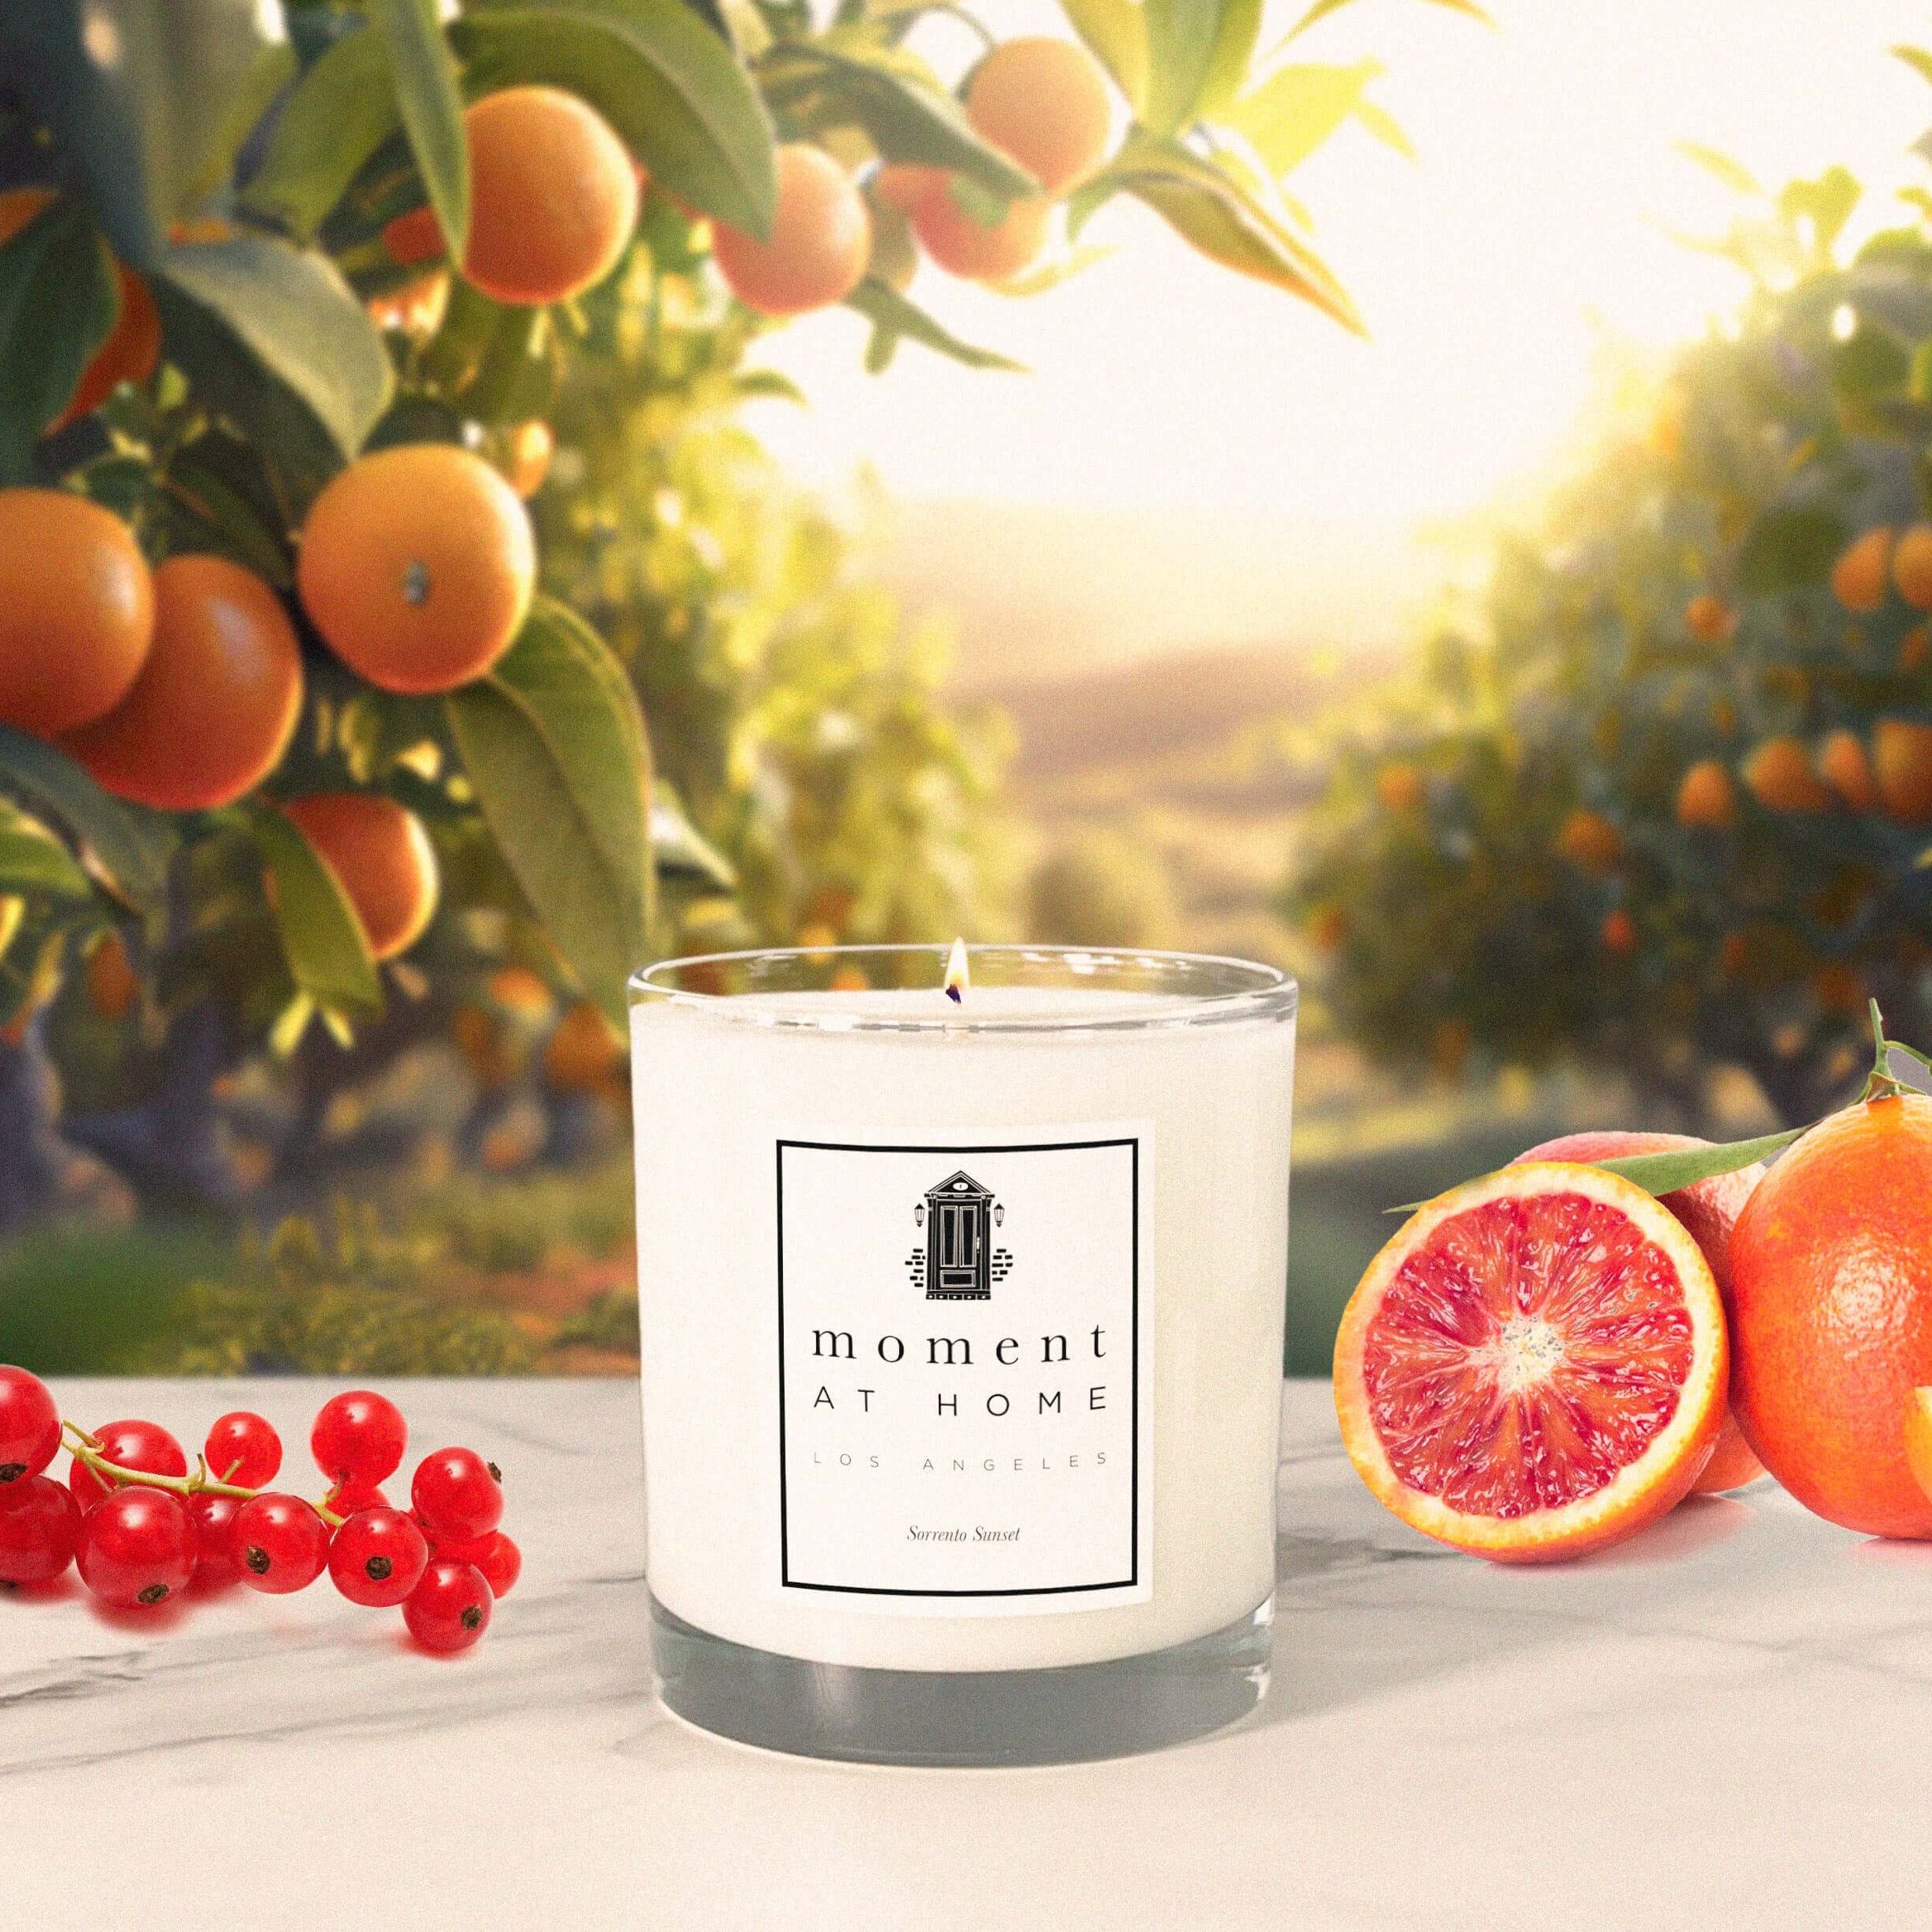 Blood orange scented candle.